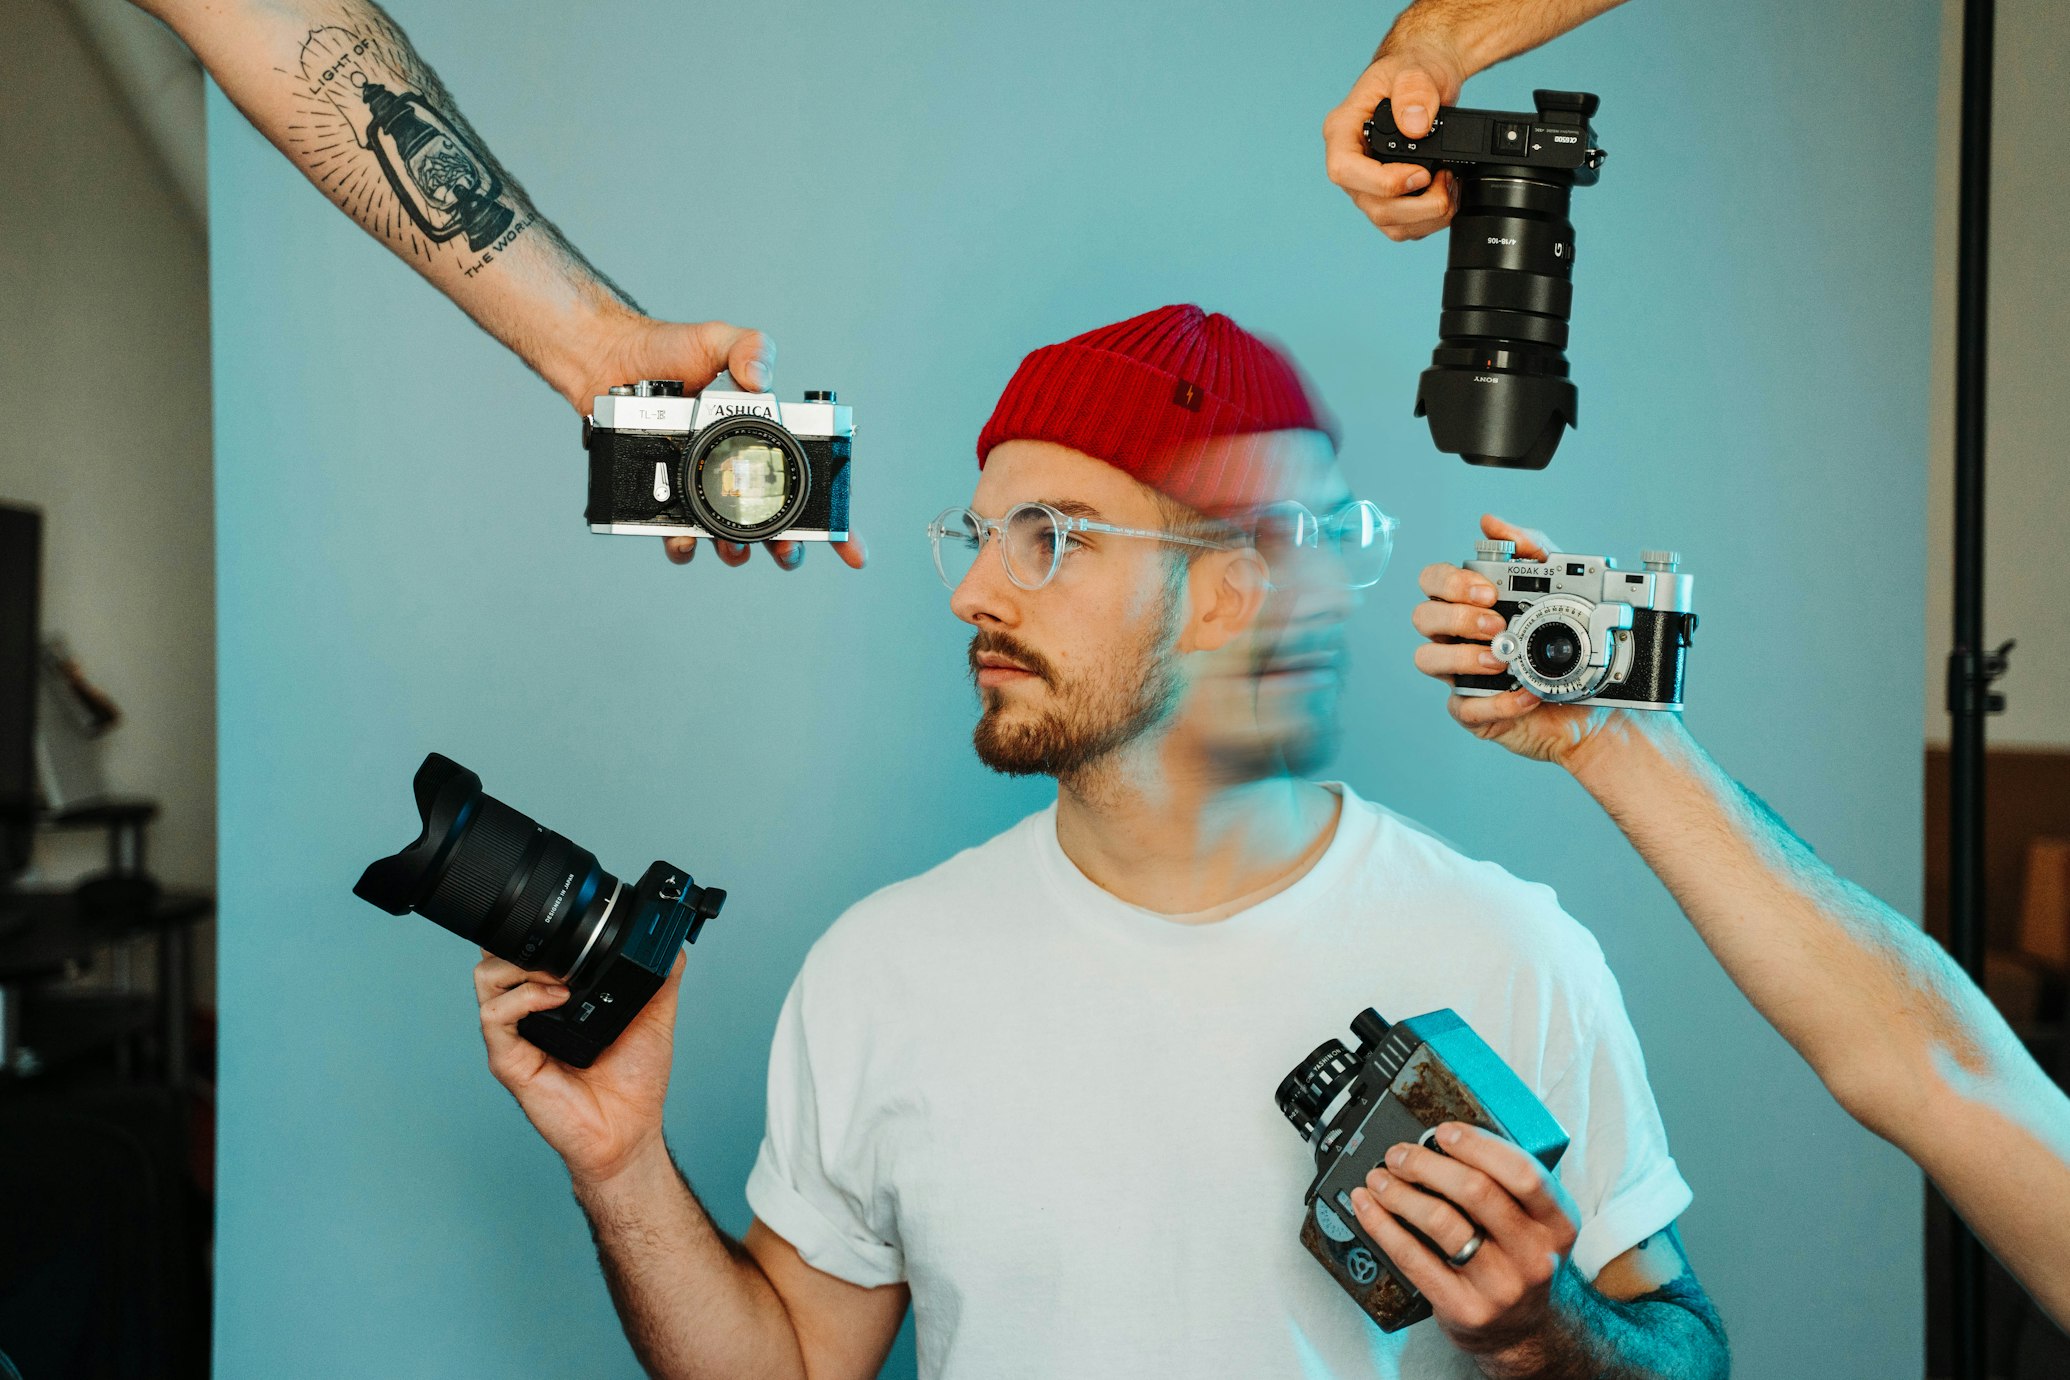 Man wearing white shirt and red hat holds two cameras while three other hands hold cameras near his face.